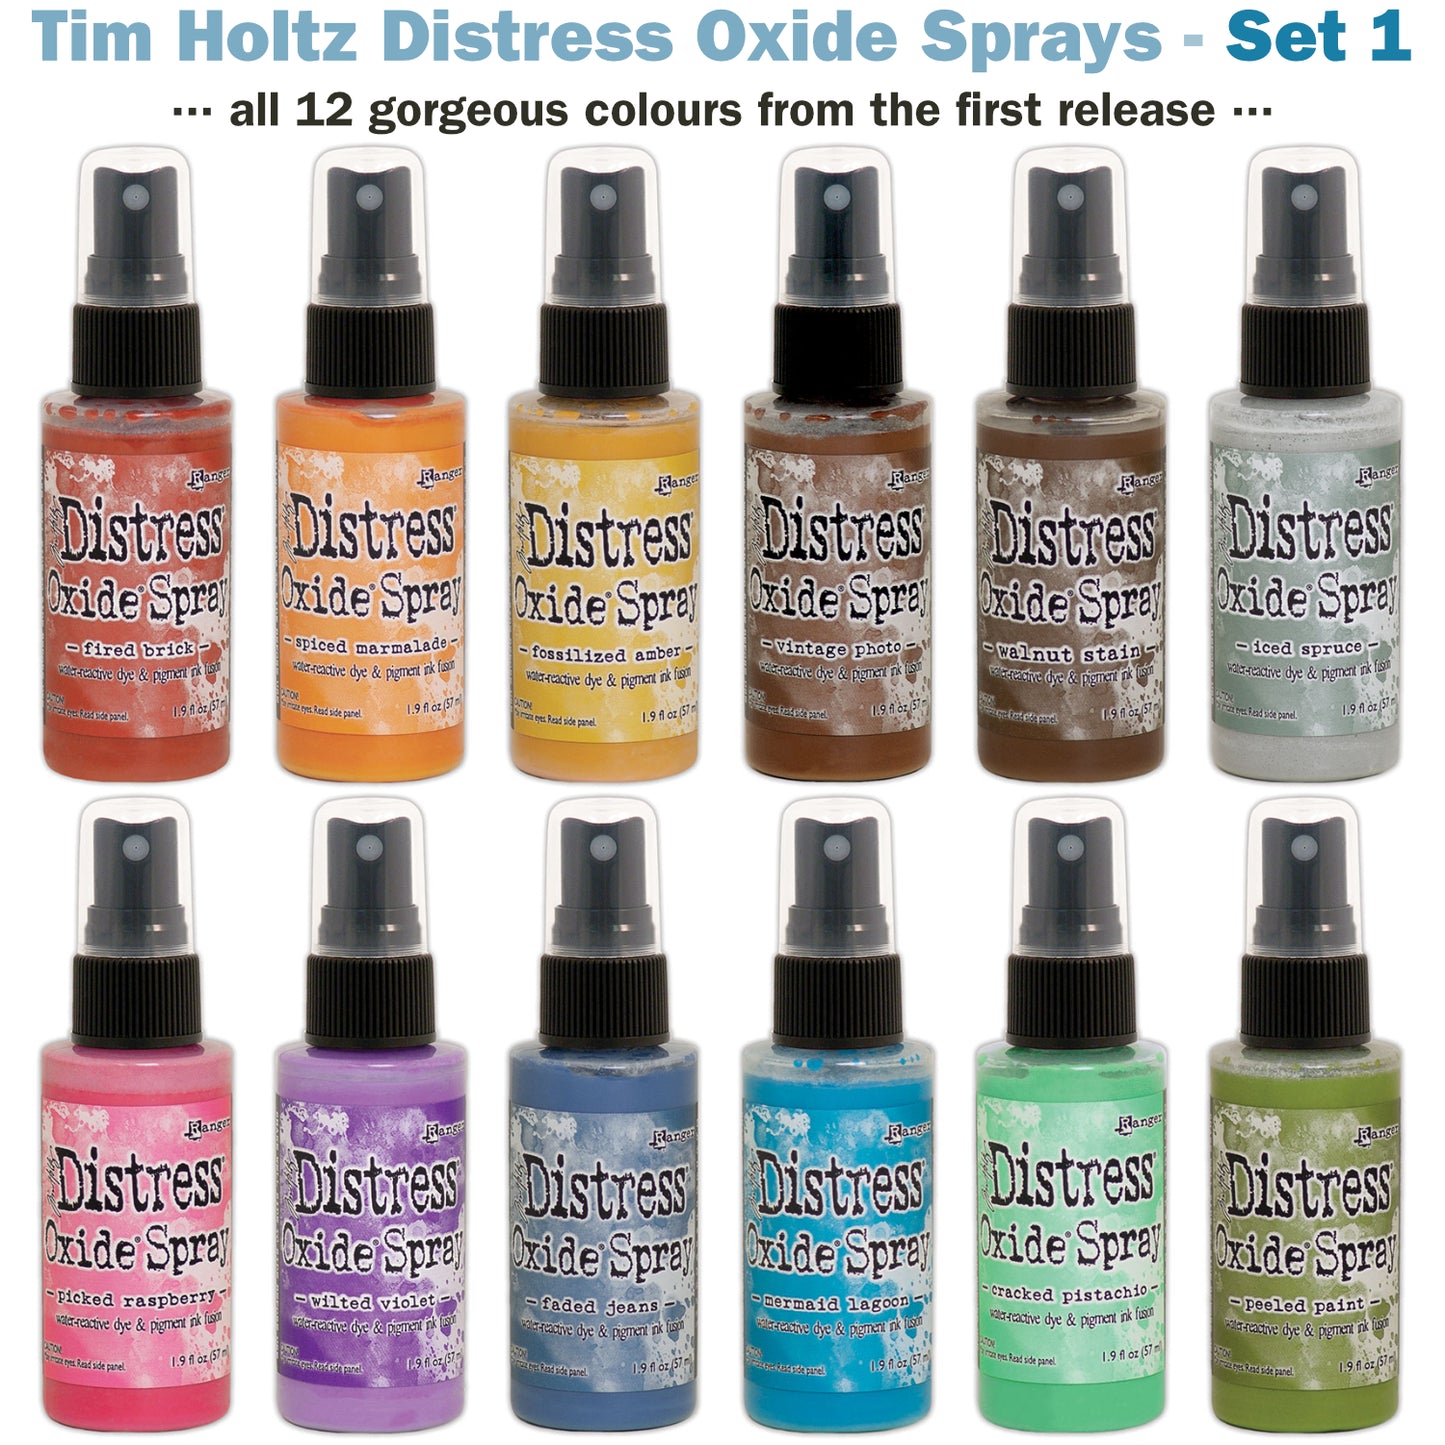 image showing Set 1 of the Distress Oxide Spray from Tim Holtz and Ranger, for sale at Art by Jenny in Australia 